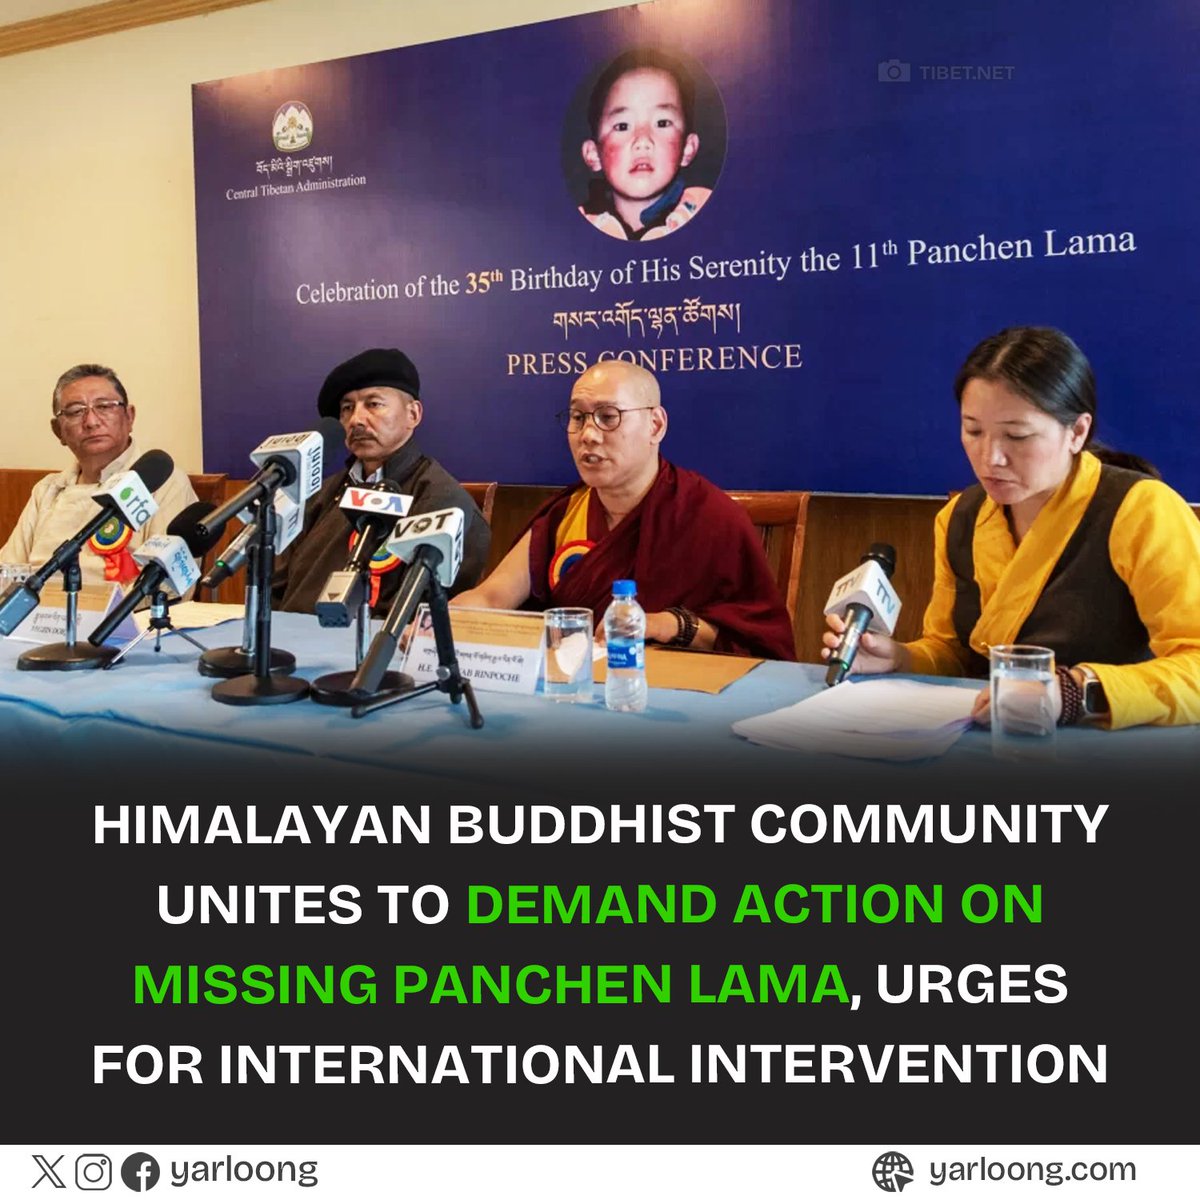 Buddhist leaders from Himalayas have issued a joint call to the international community, urging immediate action to locate 11th #PanchenLama, missing for nearly 30 years. Highlight ongoing #humanrights violations in #Tibet and the urgent need for global awareness & intervention.